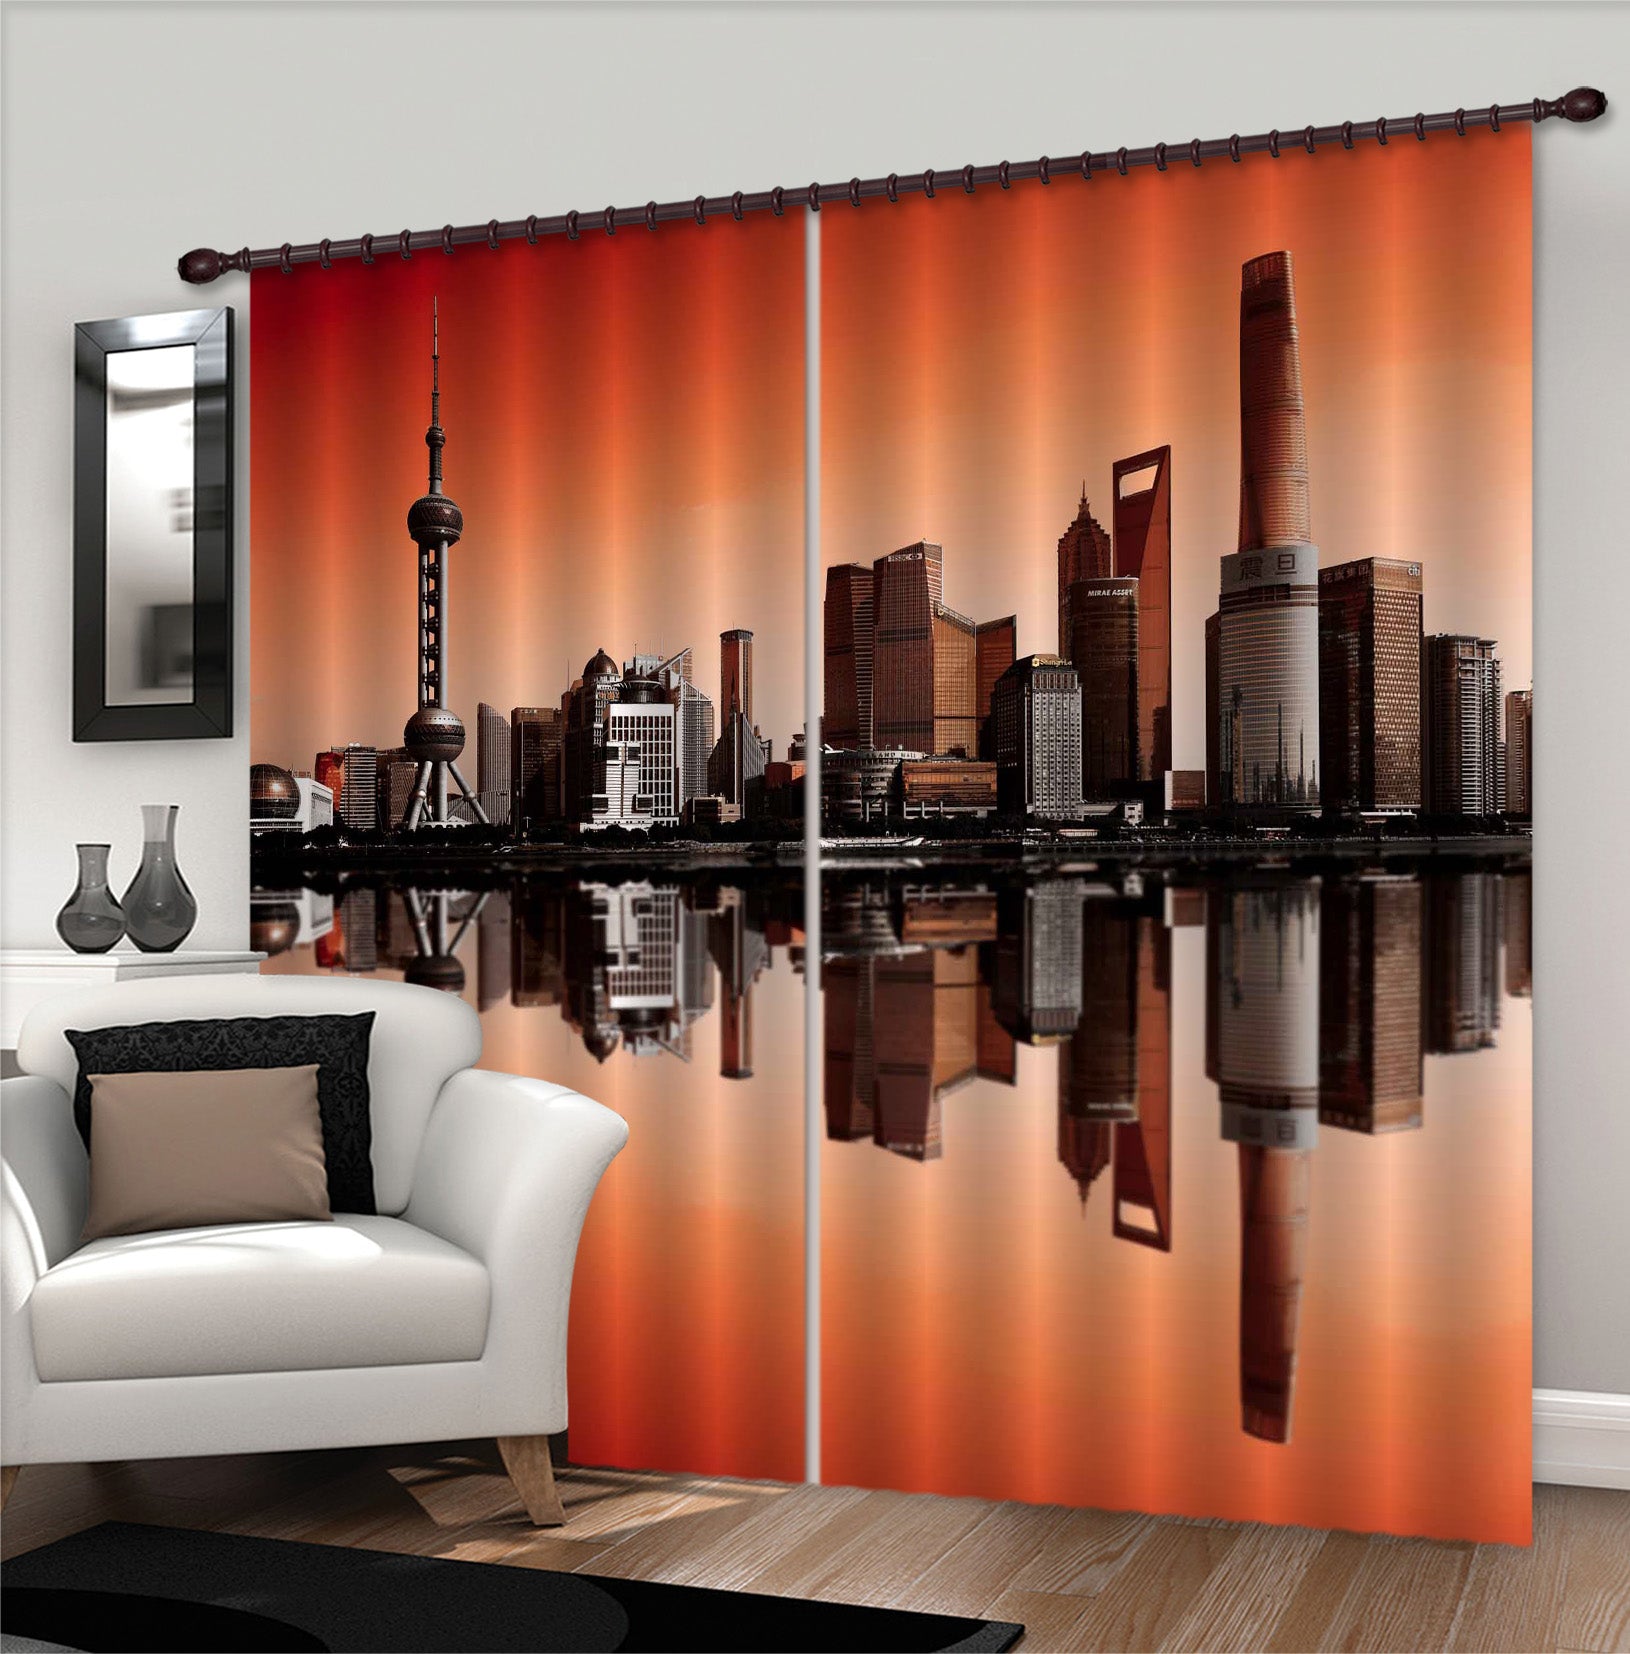 3D Waterside City 068 Marco Carmassi Curtain Curtains Drapes